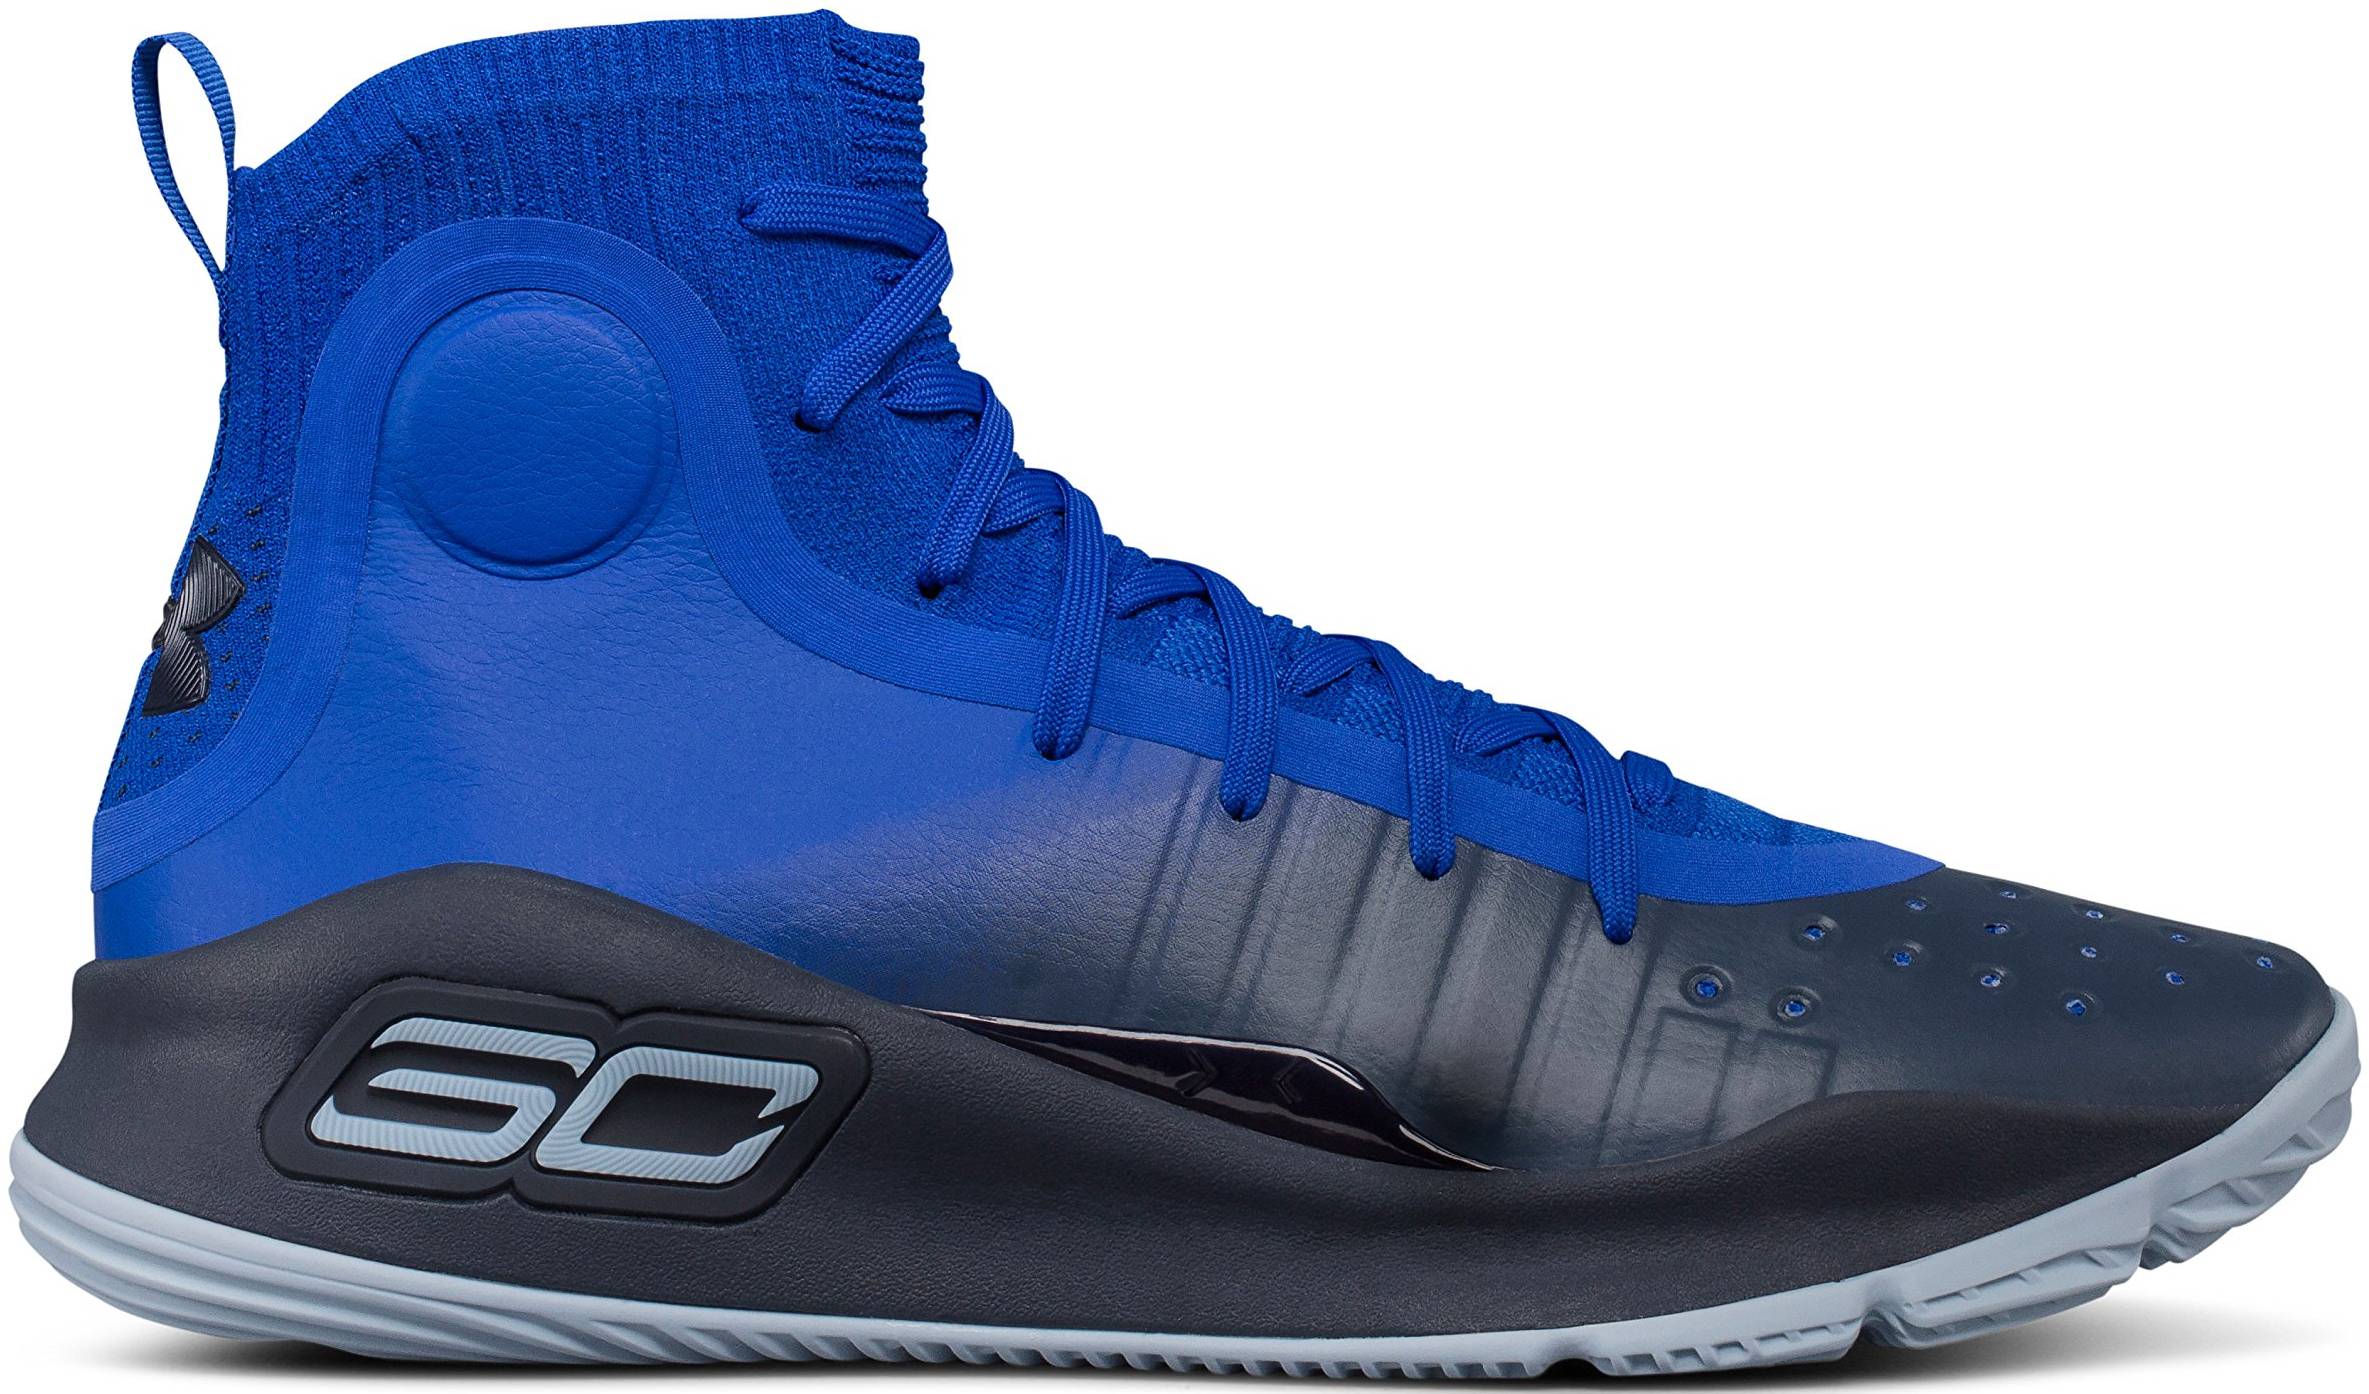 steph curry shoes white and blue